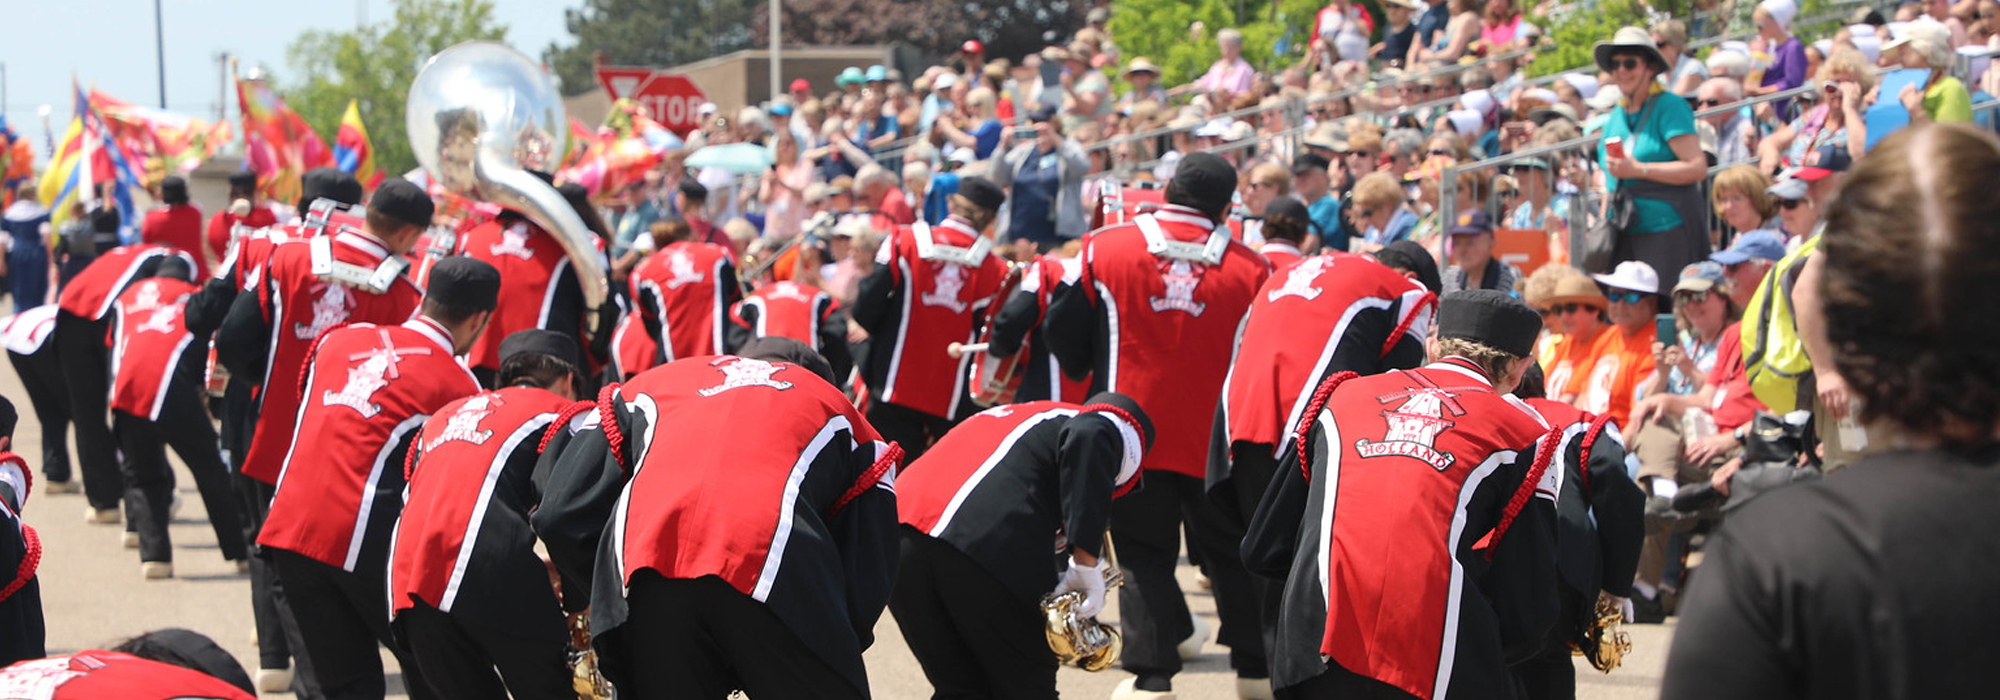 Band Marches in tulip parade